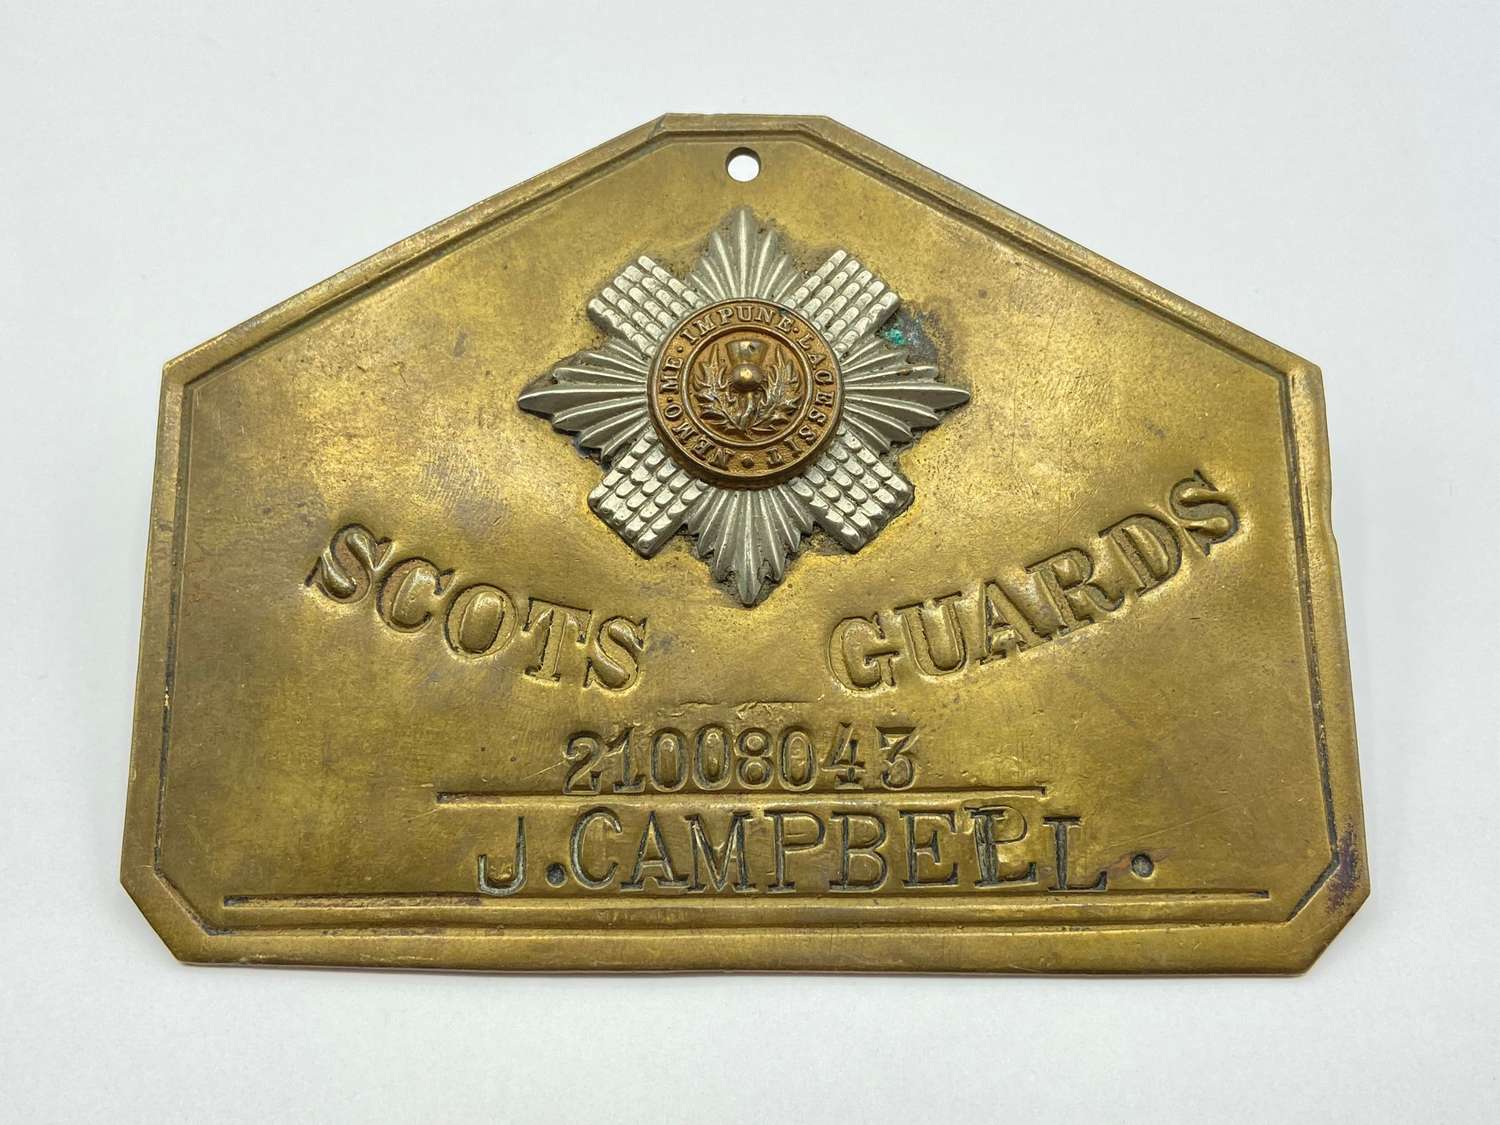 WW2 Period Scots Guards 21008043 J Campbell Bed Plate/ Duty Foot Plate